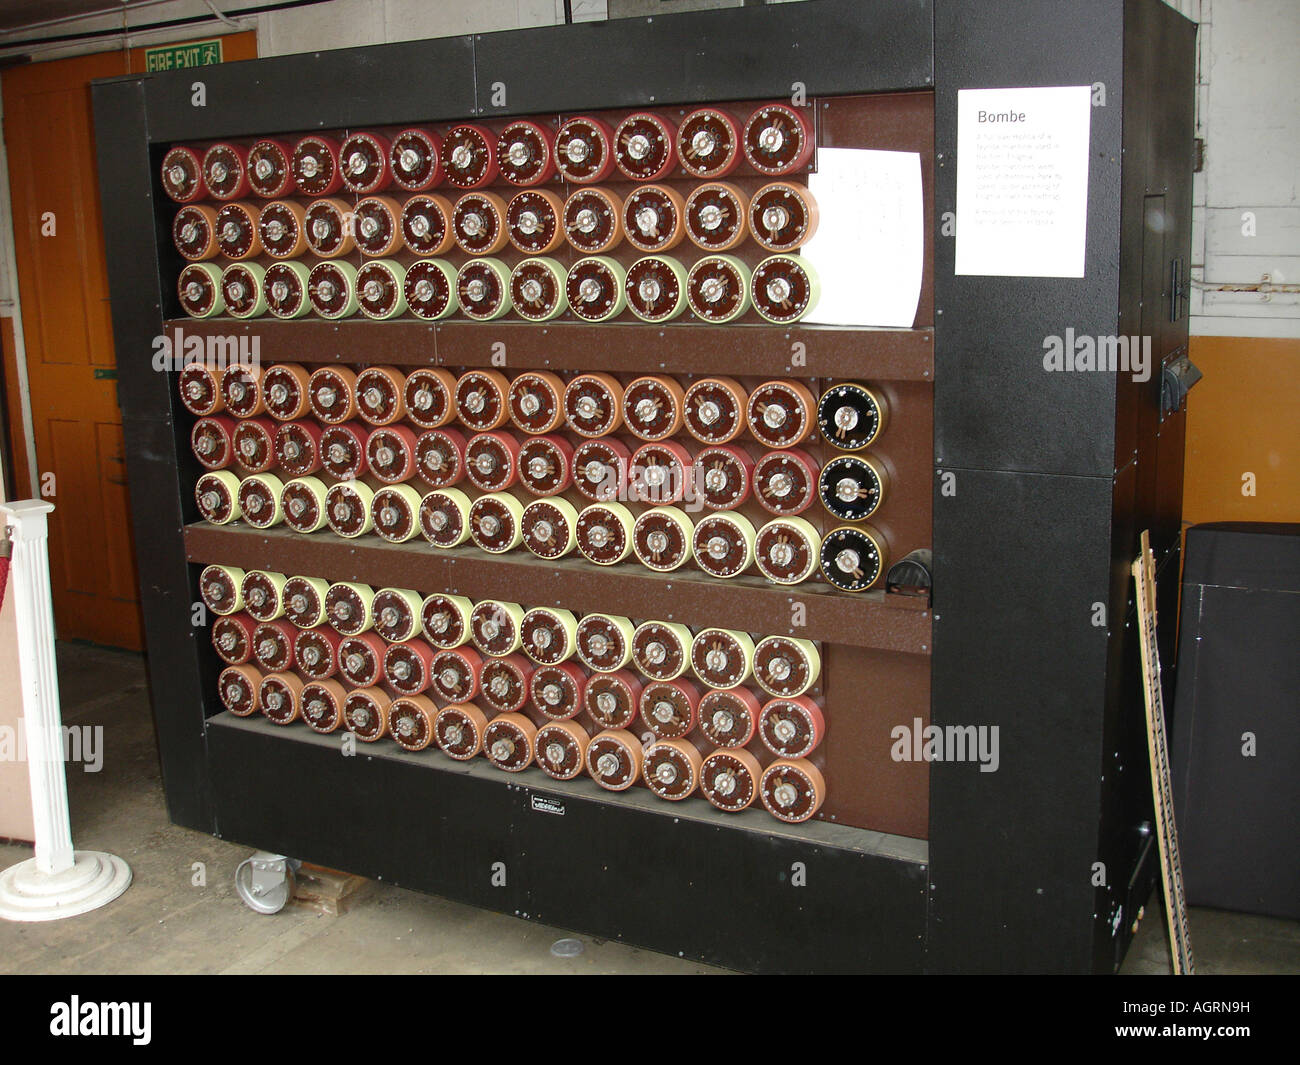 A Replica Bombe A World War Two Enigma Code Breaking Machine At The Bletchley Park Code Breaking Centre Stock Photo Alamy